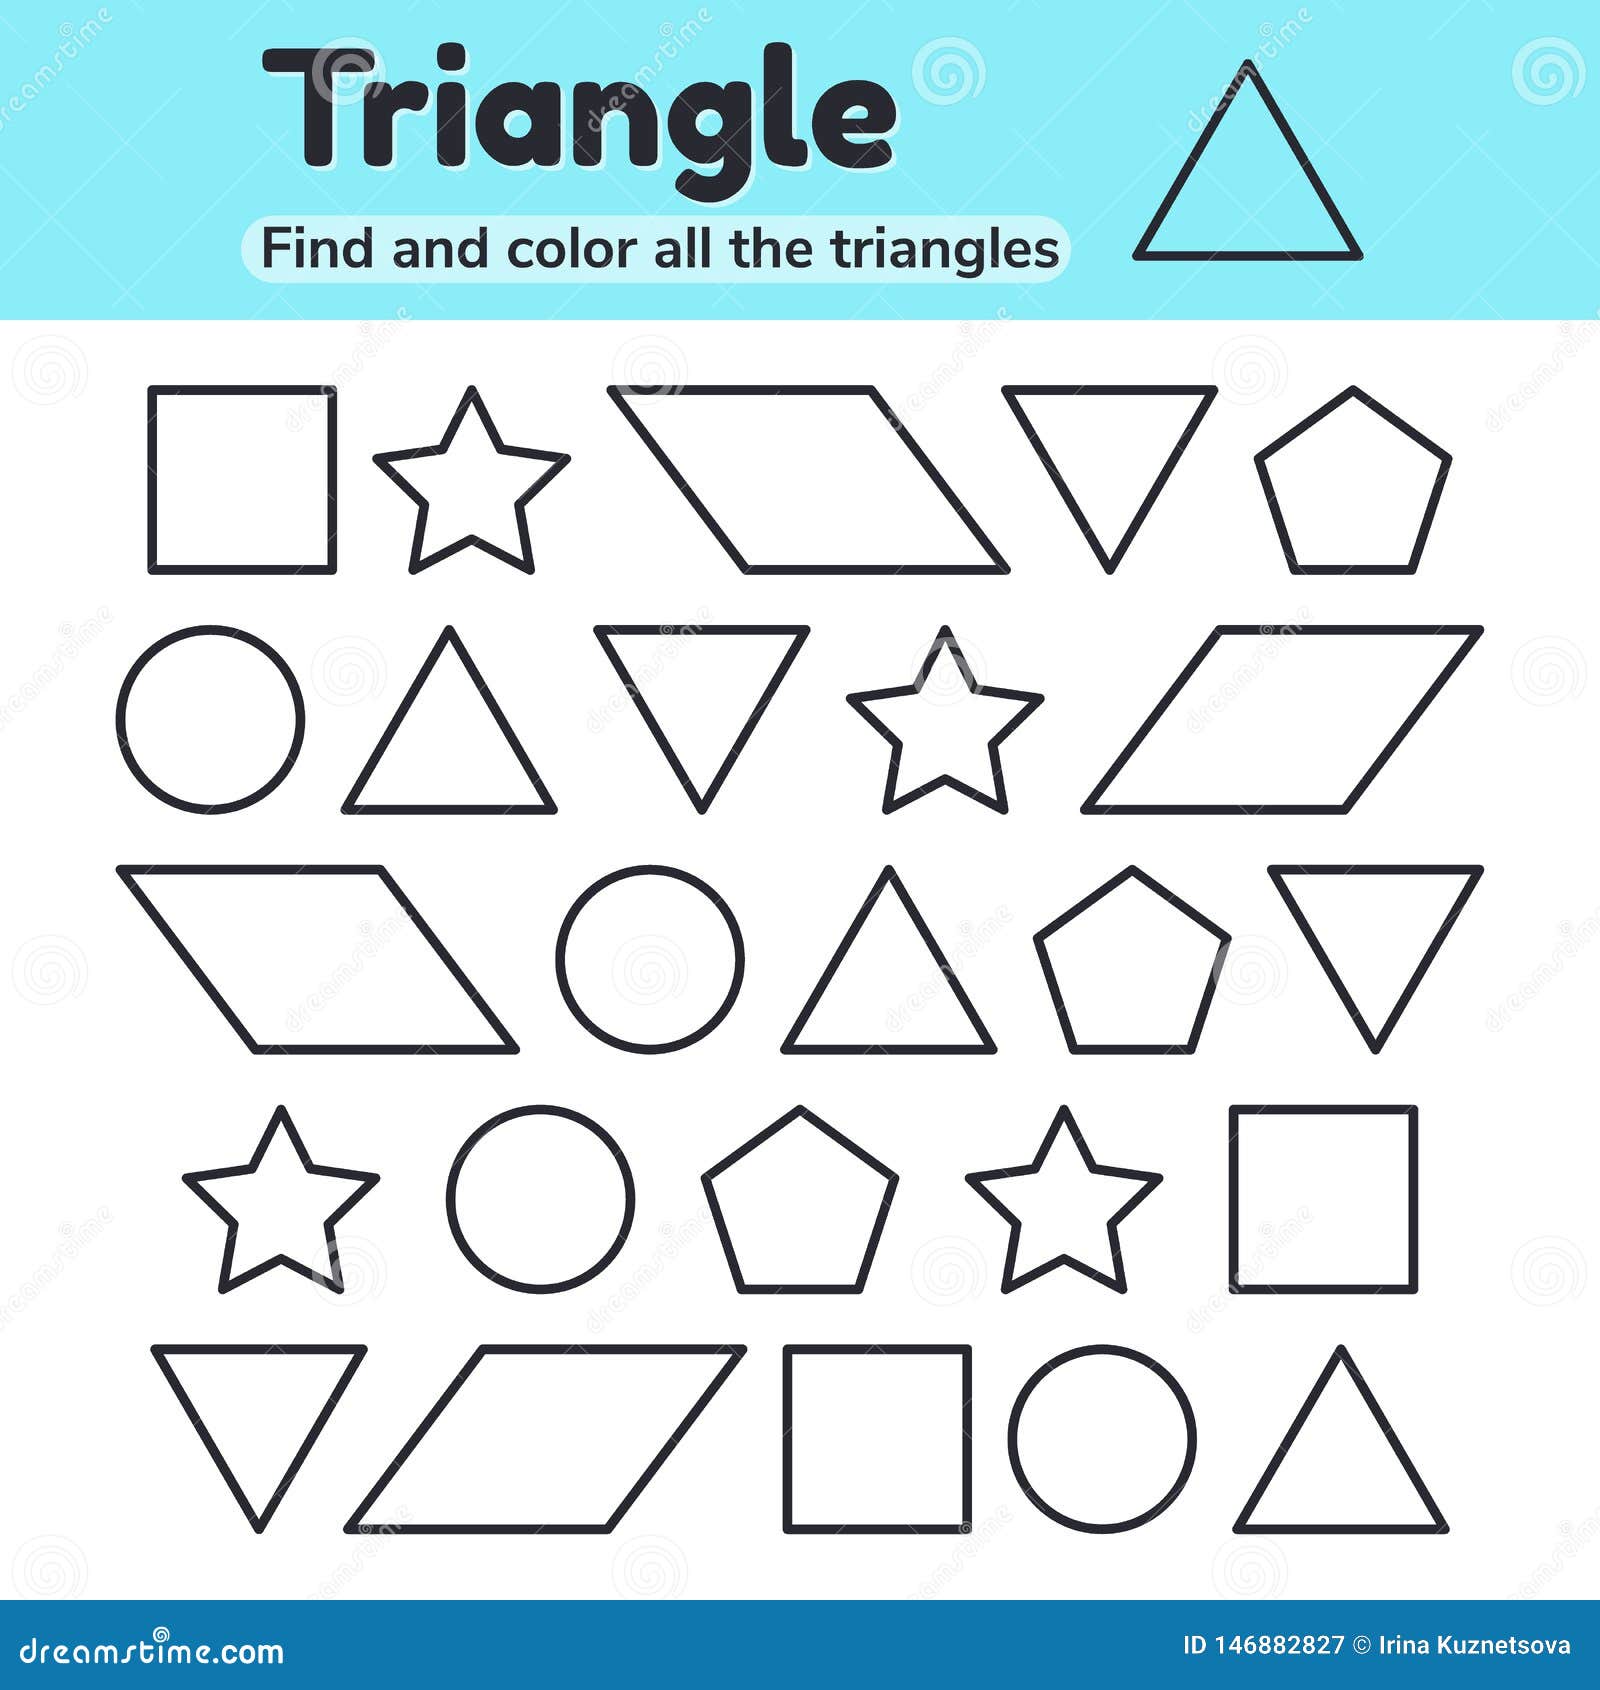 Triangle at school